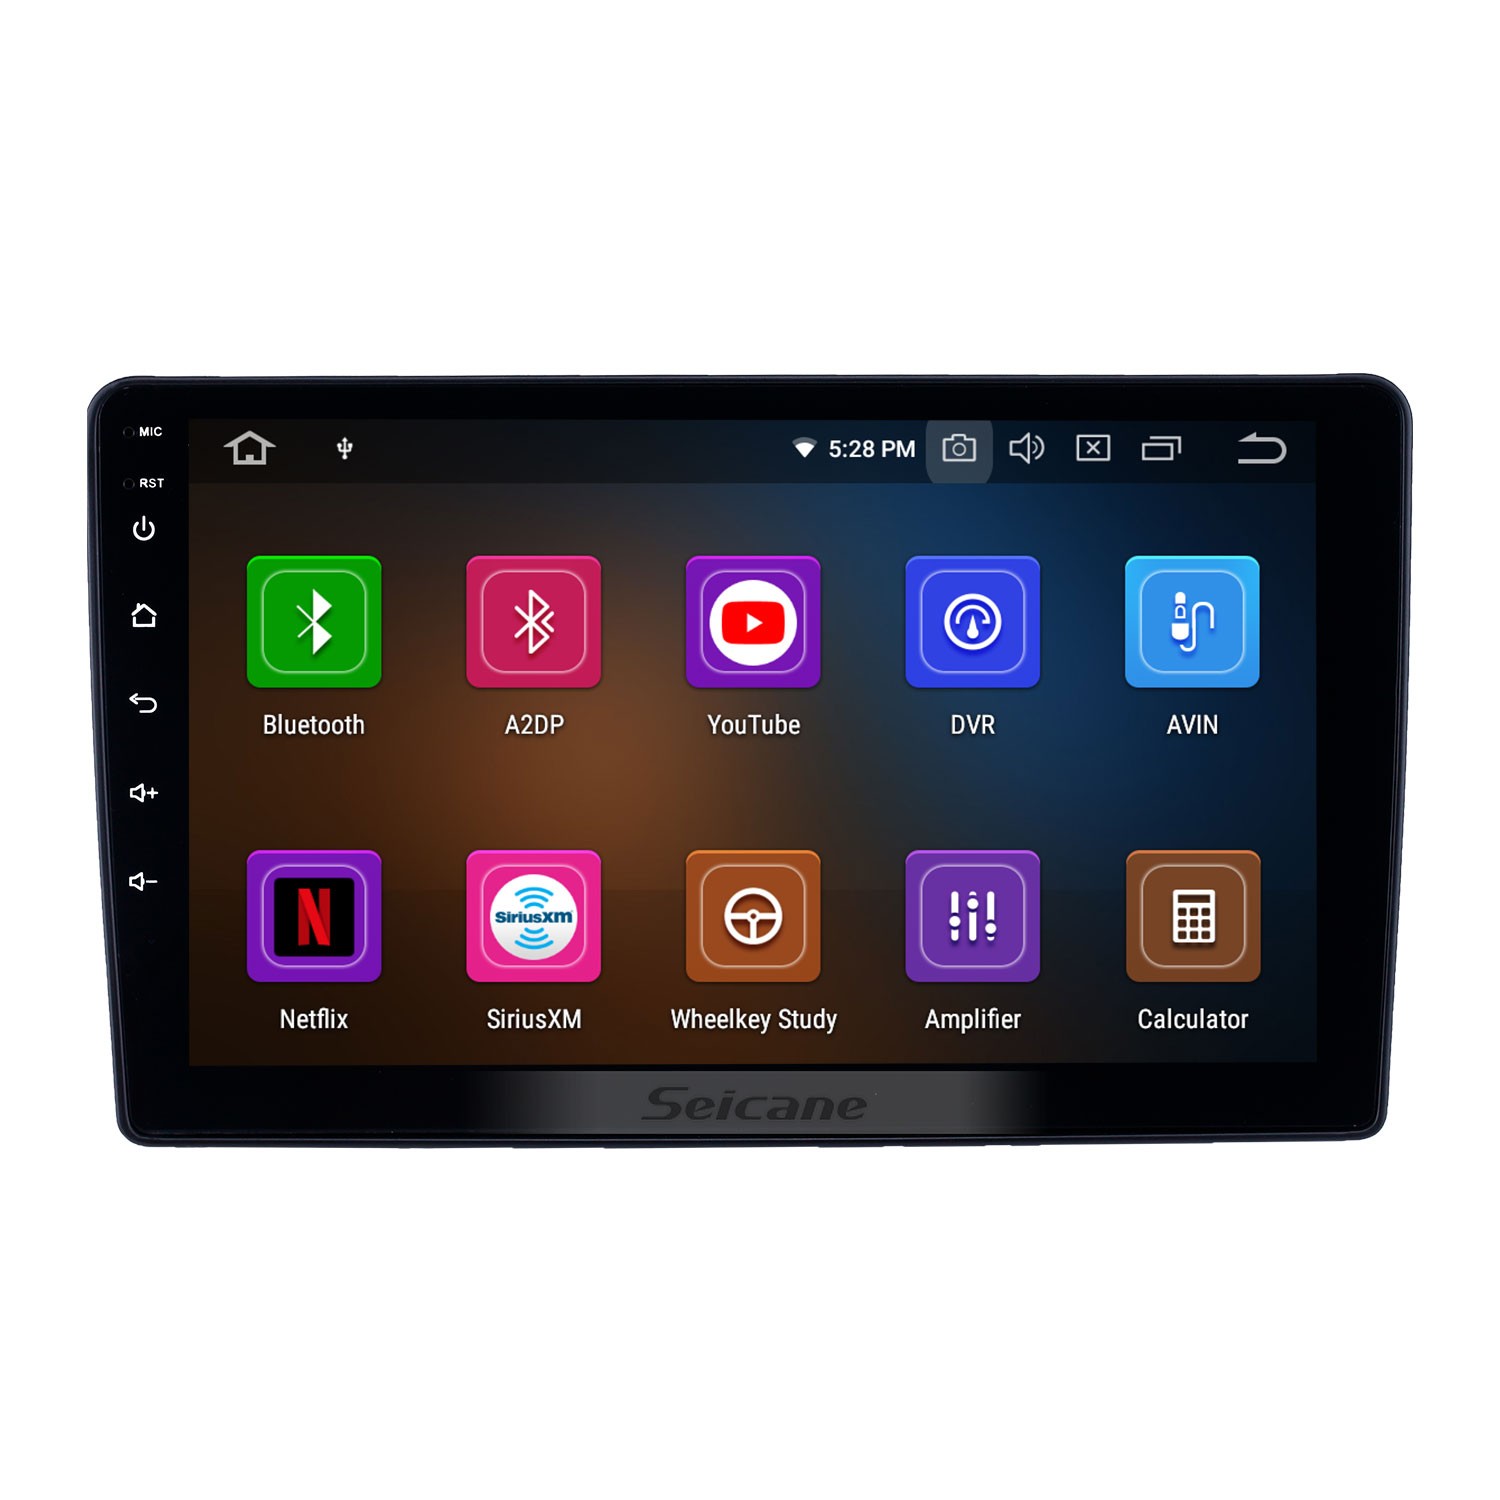 JUSTNAVI Autoradio Navigation GPS For Peugeot 307 2002-2013 Car Radio  Multimedia DVD Player Touch Screen Android Auto Audio 2din